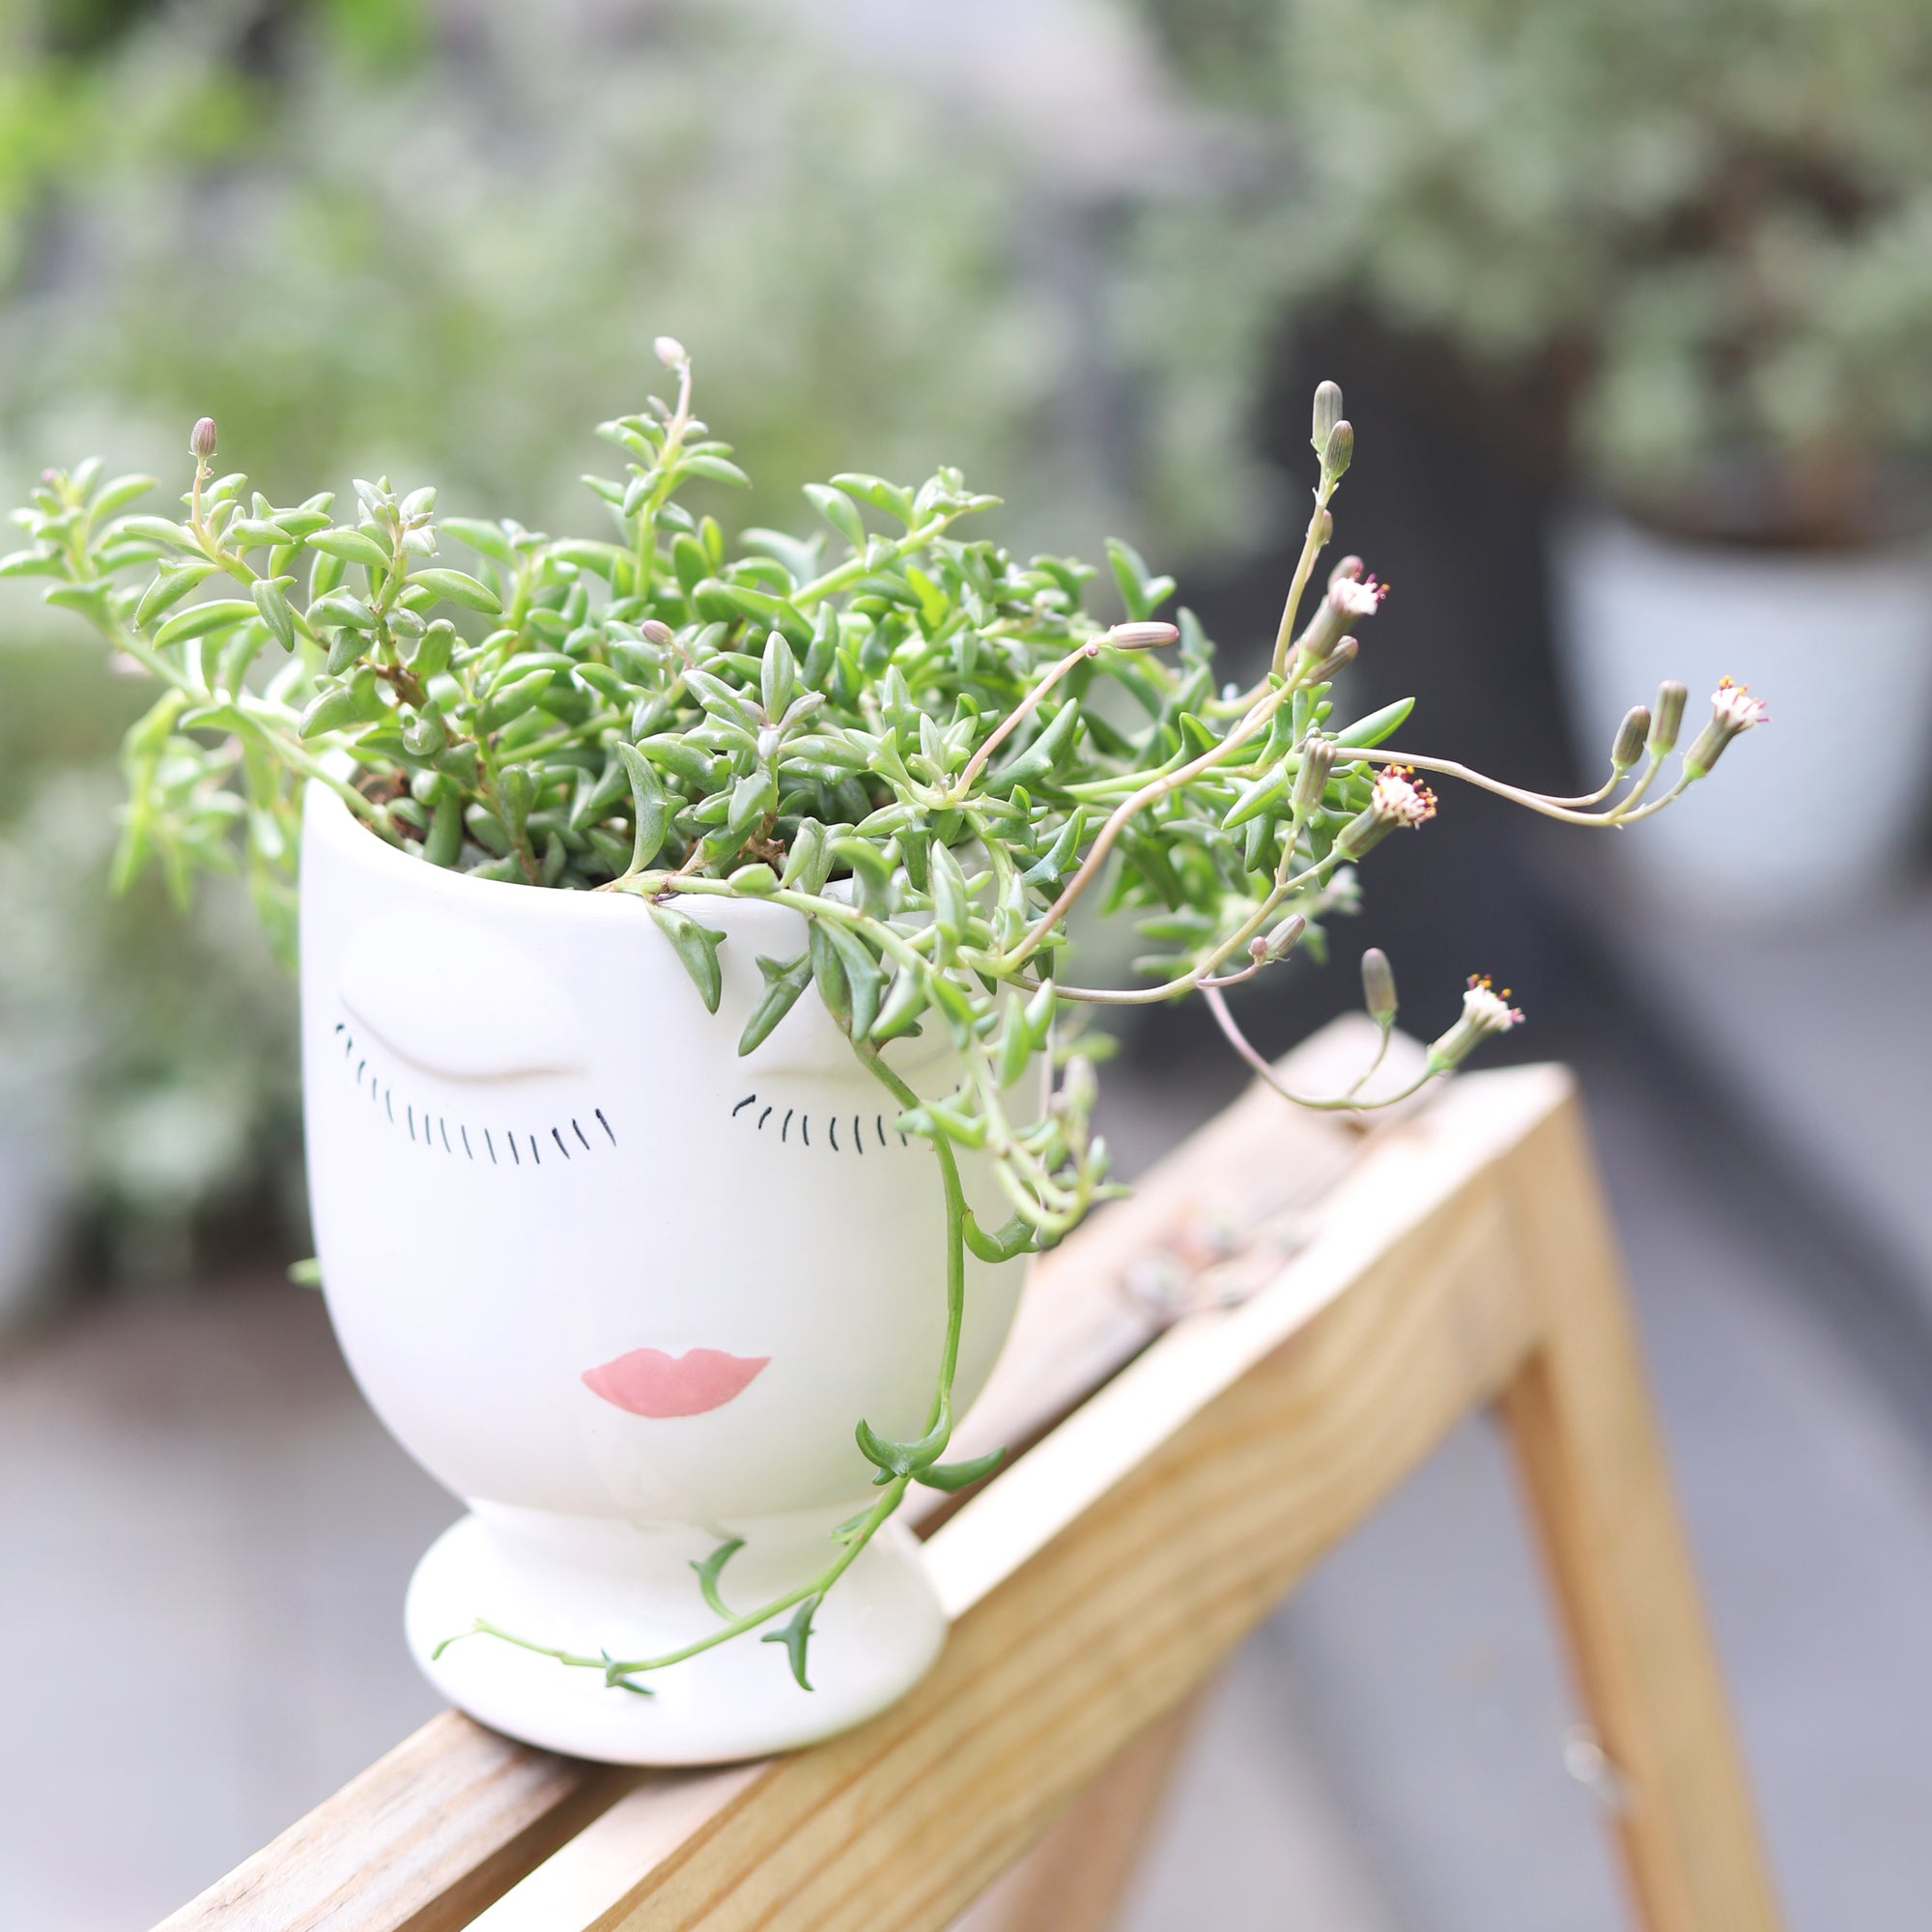 String of Dolphins Senecio Peregrinus Succulent Plant, Succulent Plant for sale, buy succulent online, Holiday decor ideas, Succulent gifts, string of dolphins plant for sale